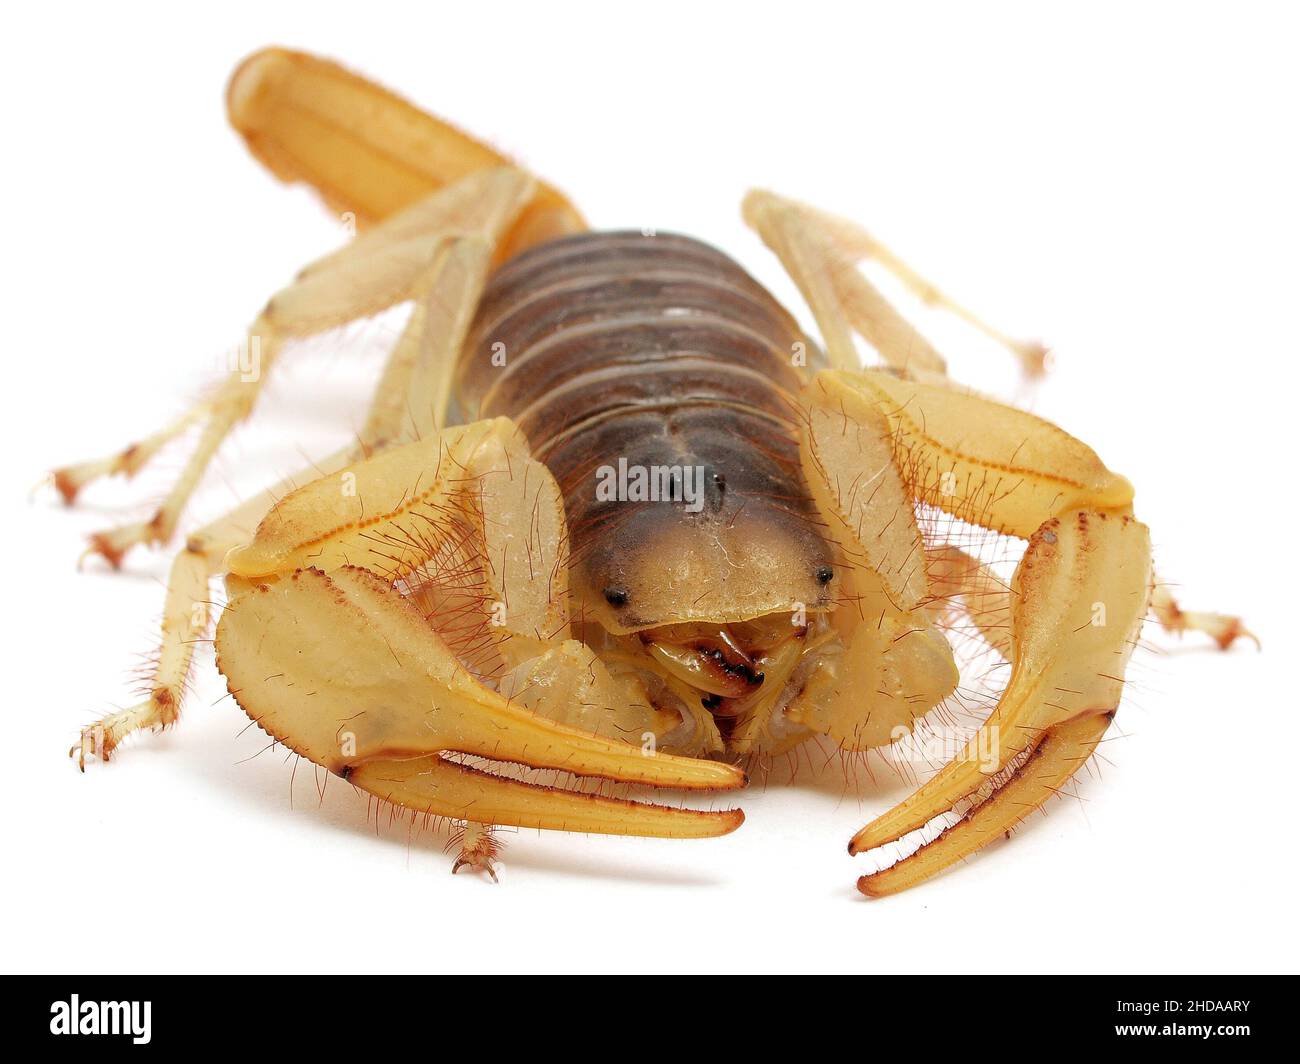 close-up of the front of a giant desert hairy scorpion, Hadrurus arizonensis, isolated, cECP 2012 Stock Photo